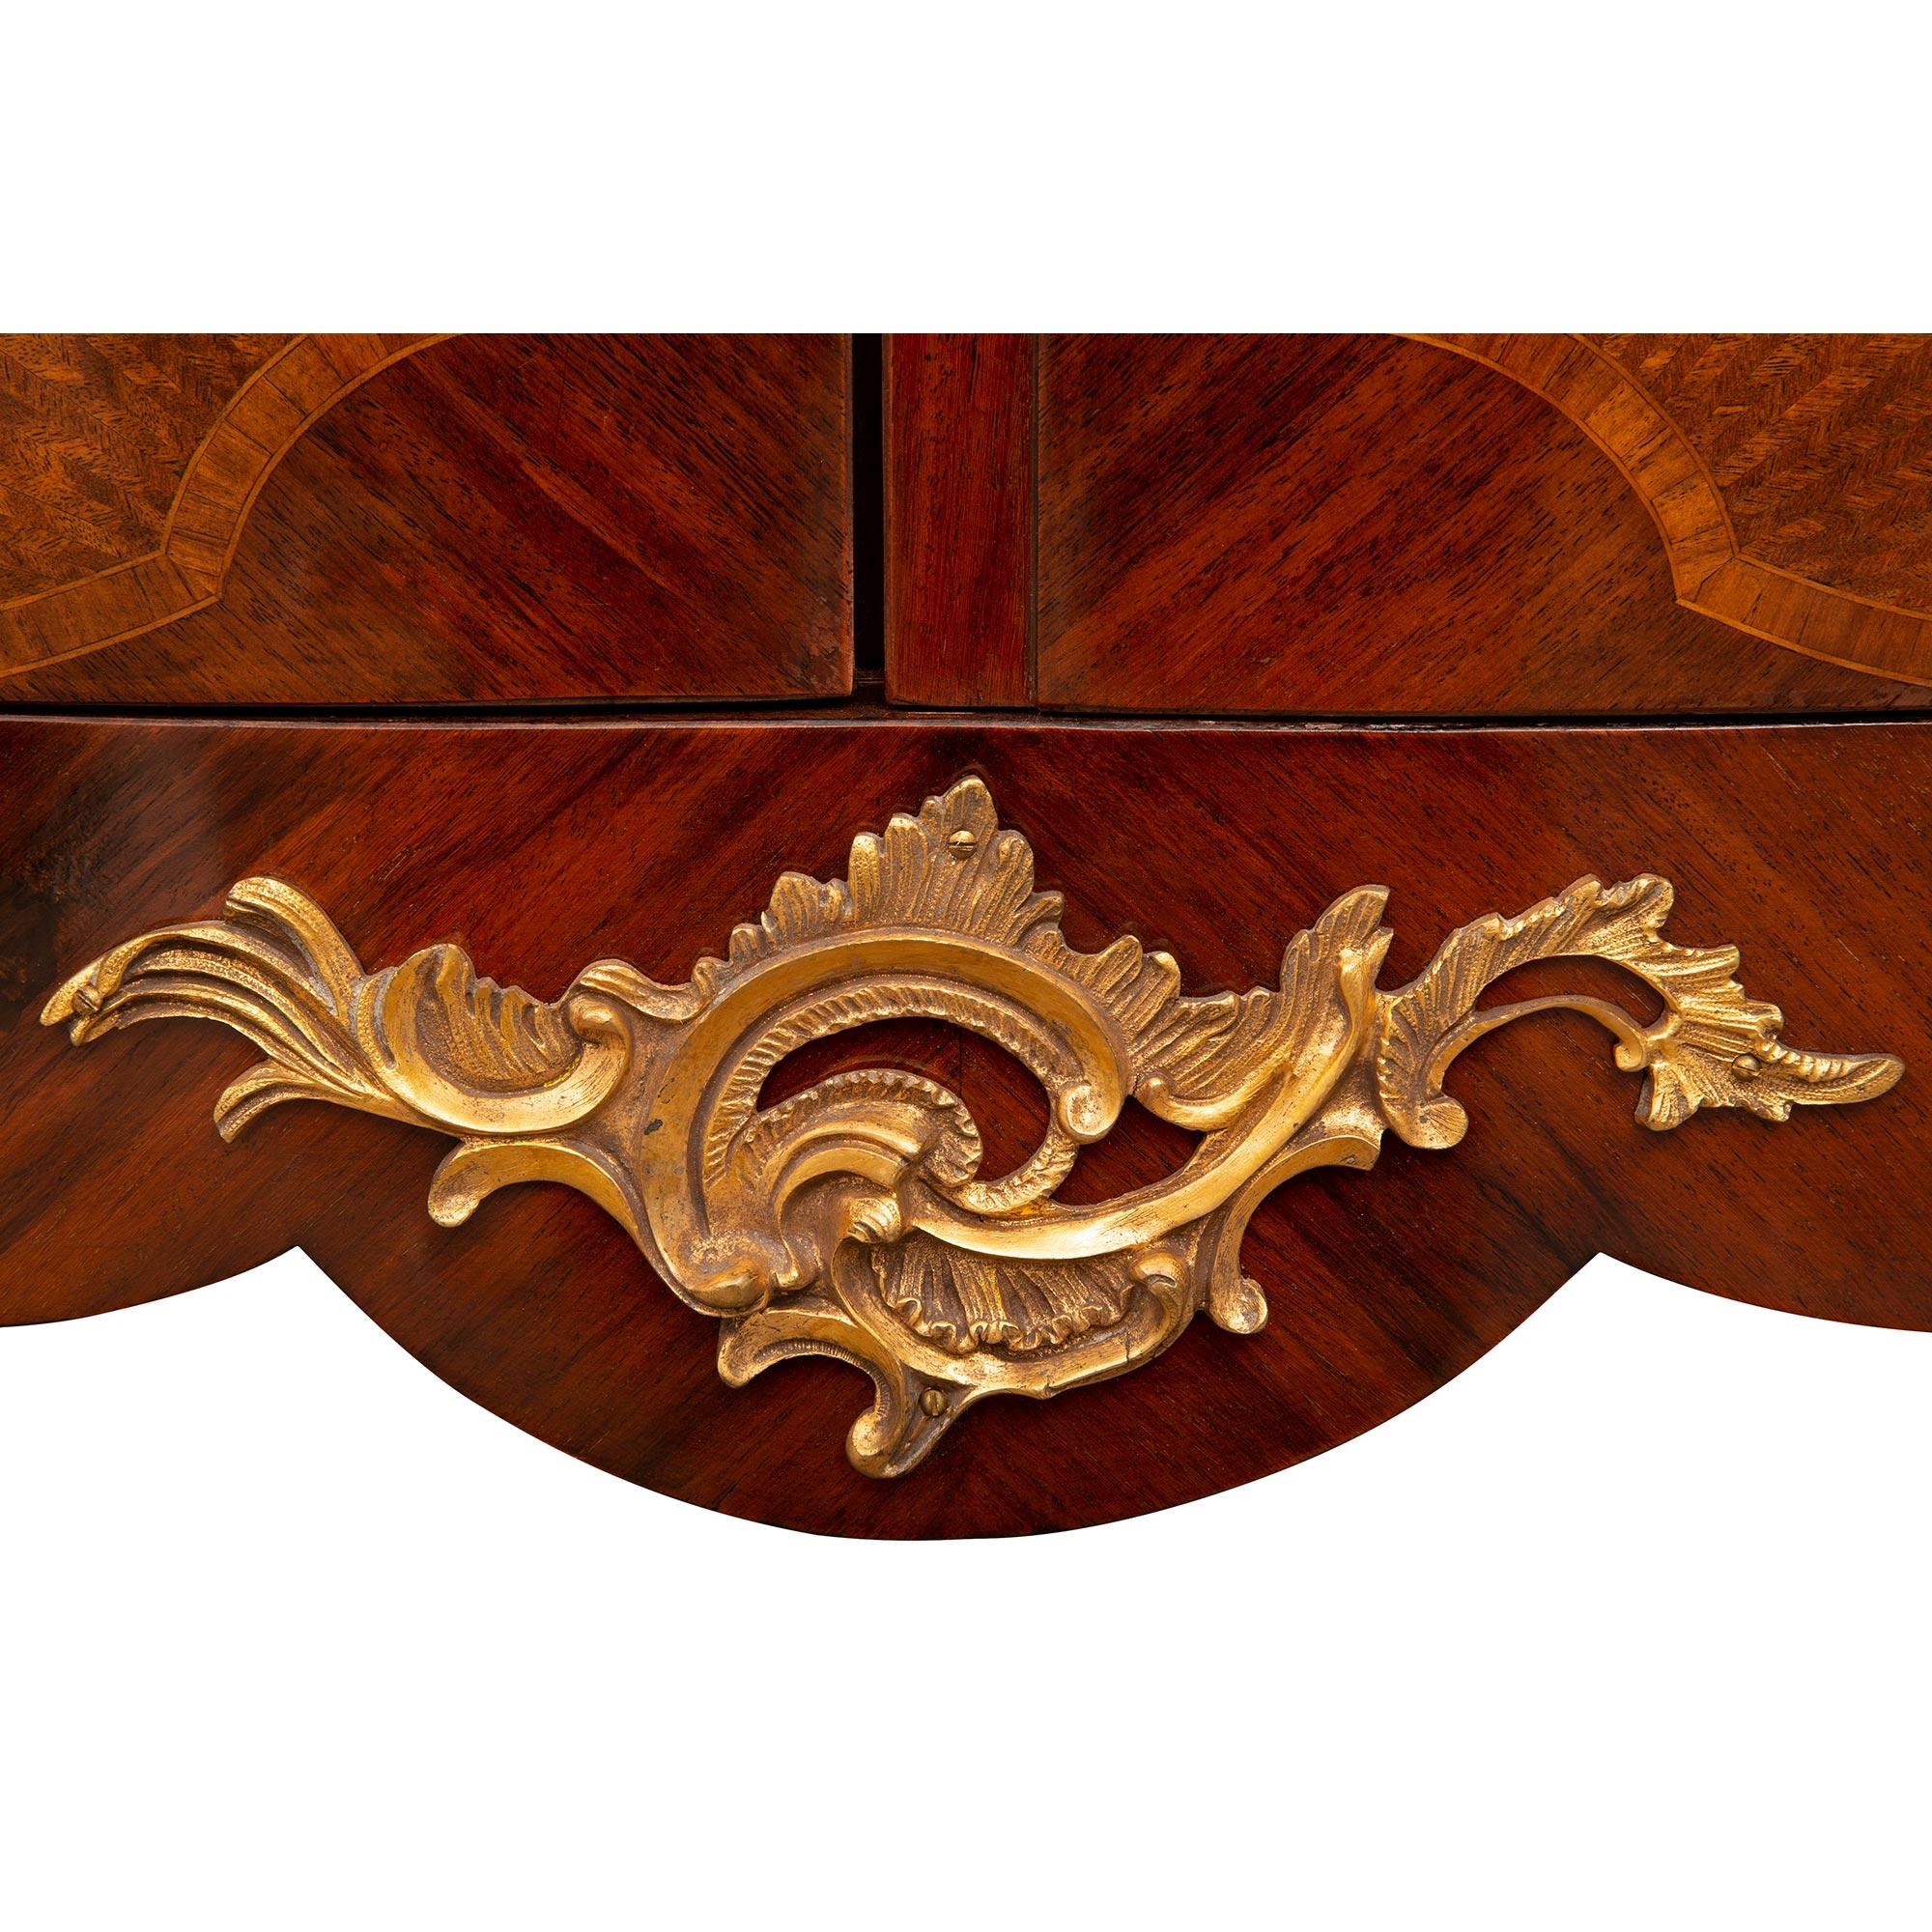 French 19th Century Louis XV St. Kingwood, Tulipwood, Ormolu and Marble Cabinet For Sale 5